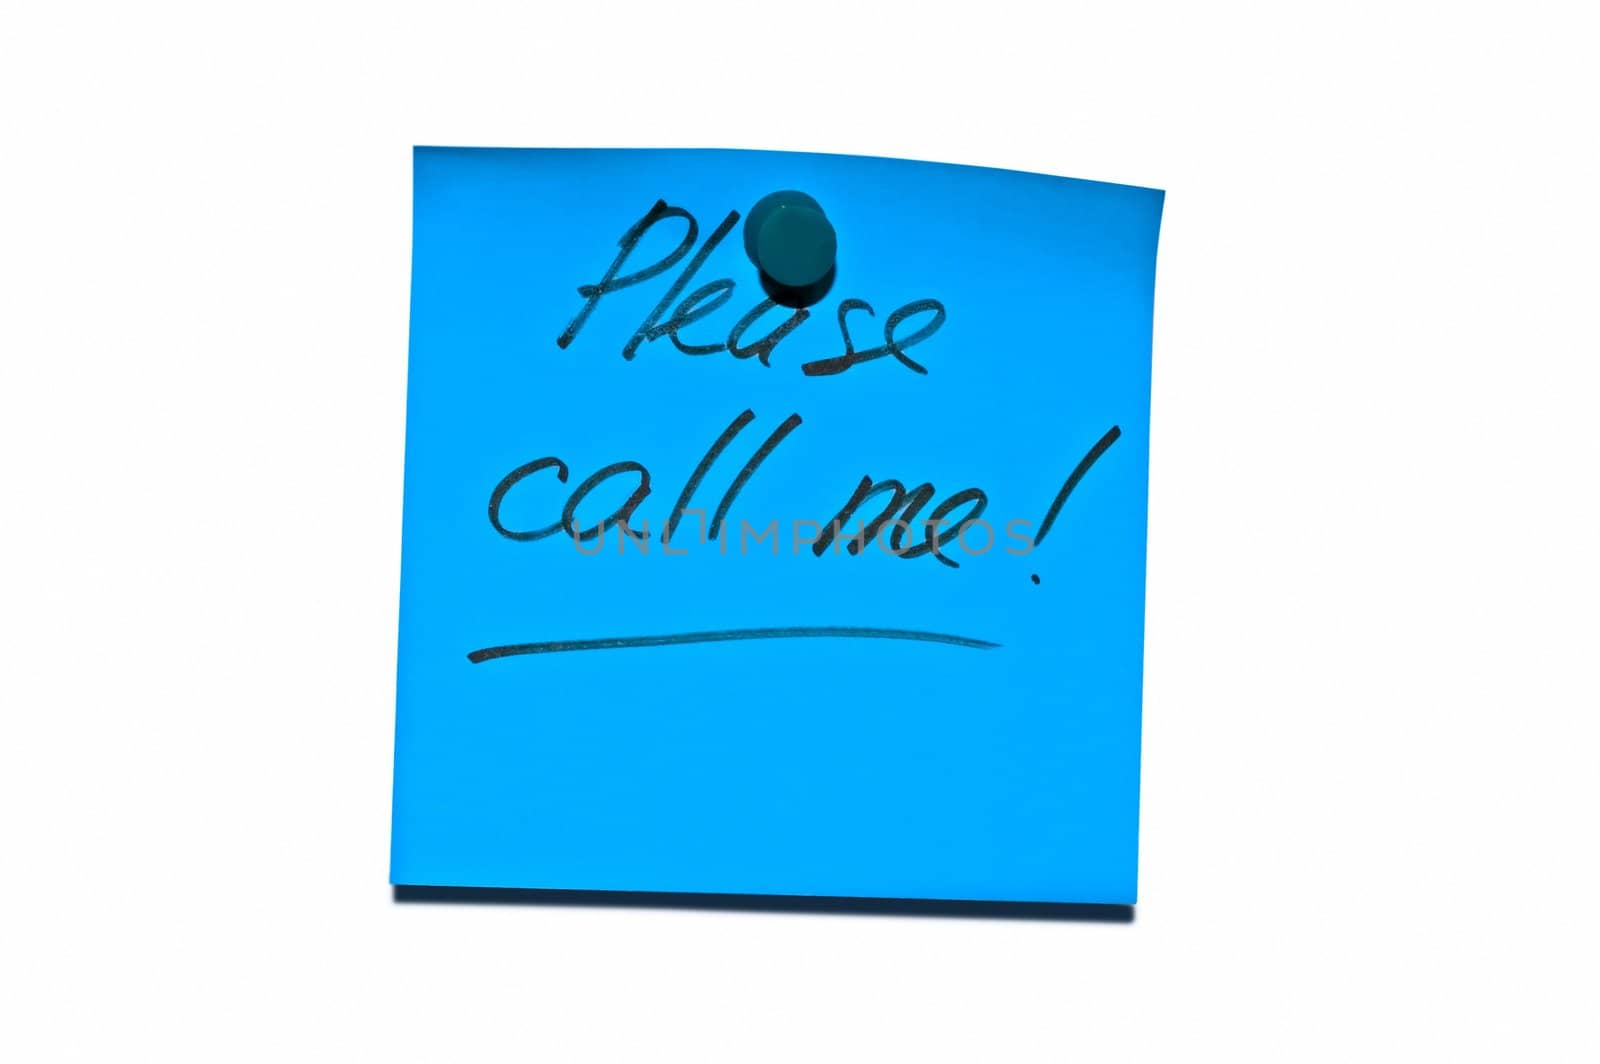 Sticky post it note with "Please call me" wording